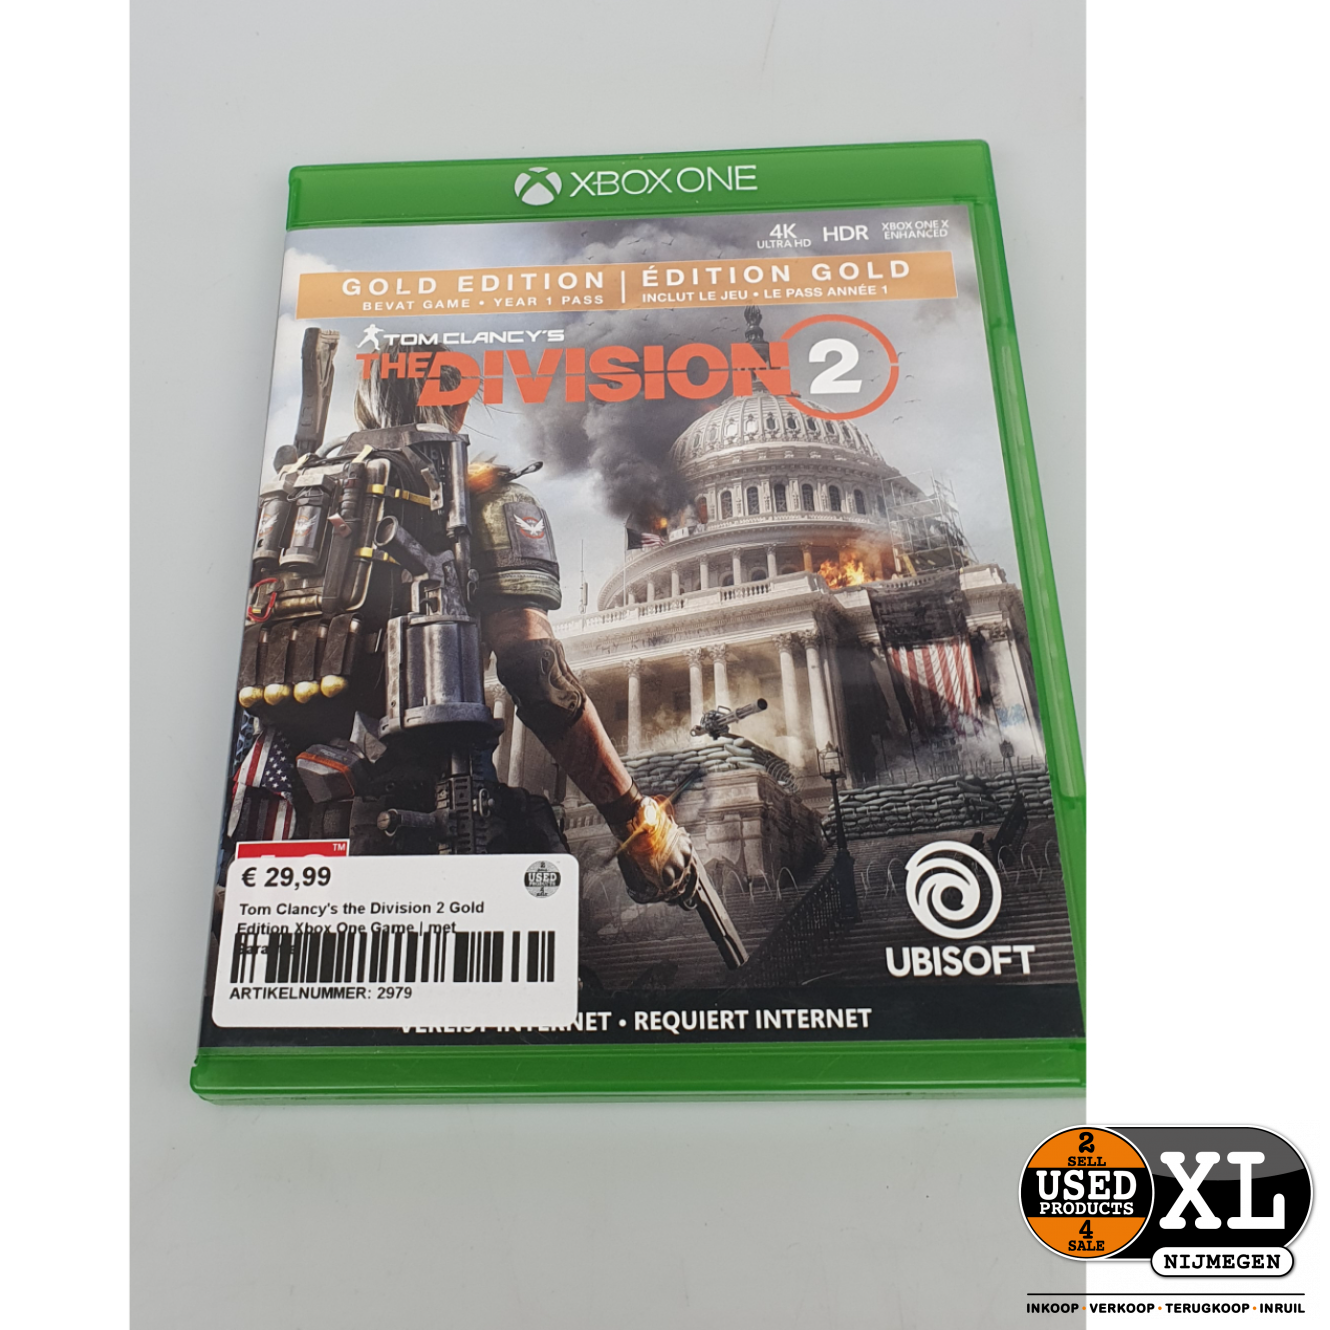 Tom Clancy's the Division 2 Gold Edition Xbox One Game | met Garantie -  Used Products Nijmegen XL